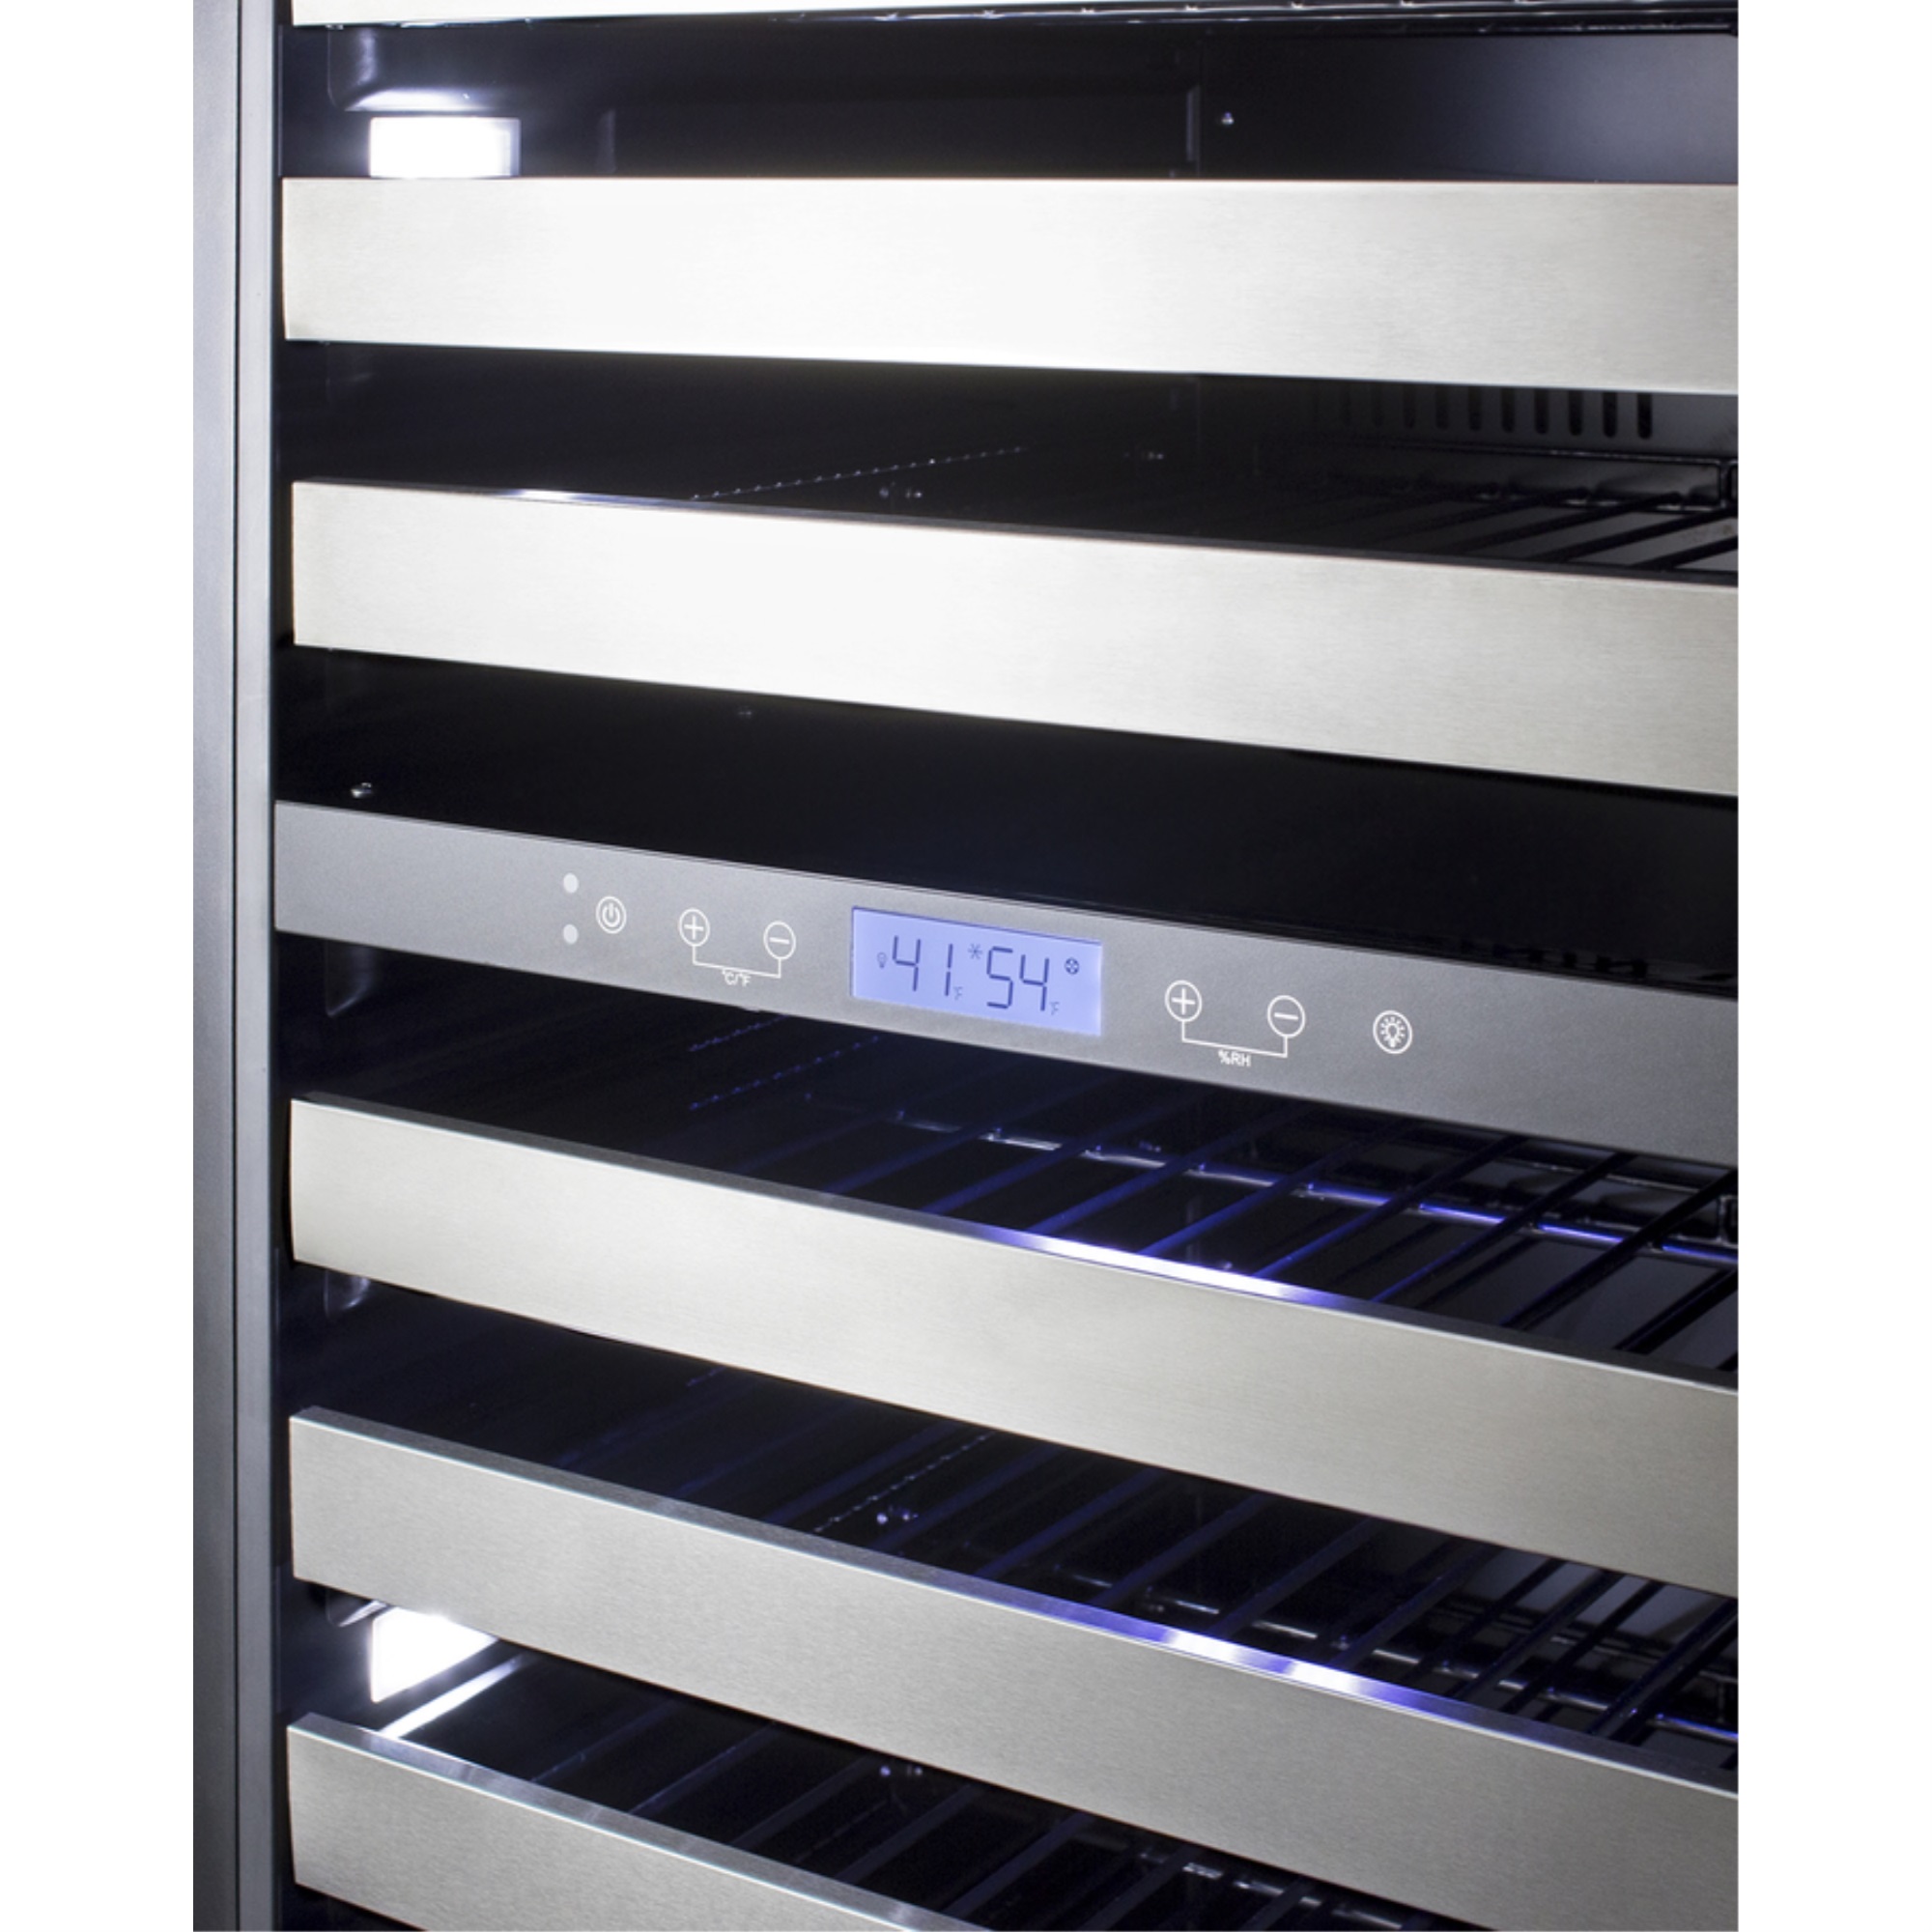 Summit Commercially approved dual zone wine cellar for built-in or freestanding use with seamless stainless steel door and full-exten